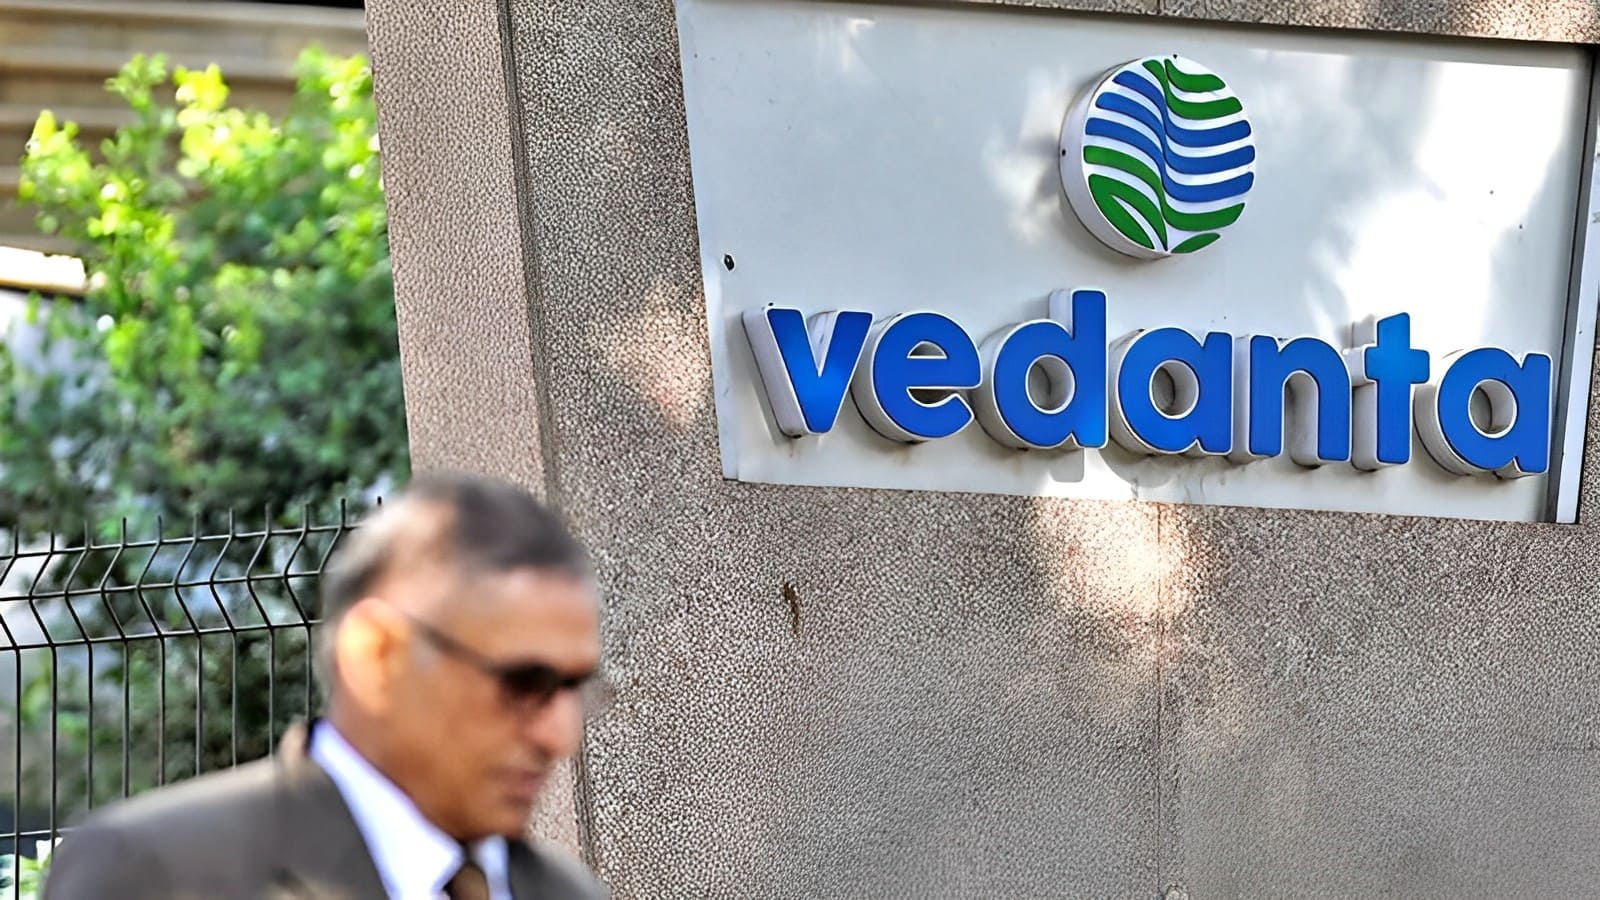 Vedanta plans demerger in extensive business move